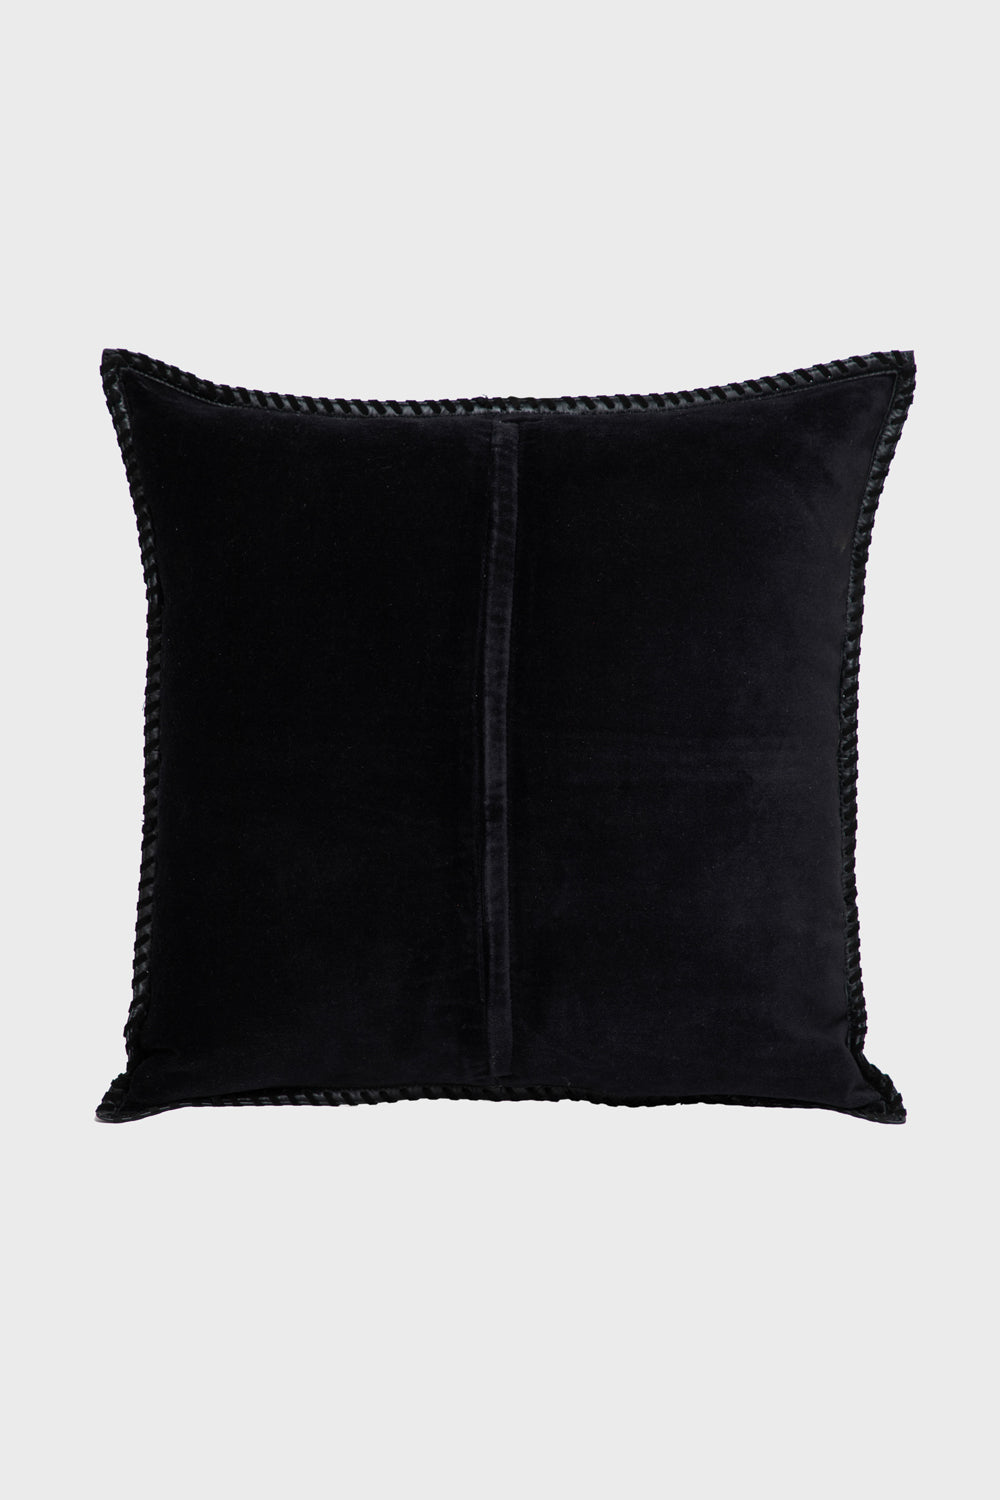 Justanned Interlace Black Cushion Cover